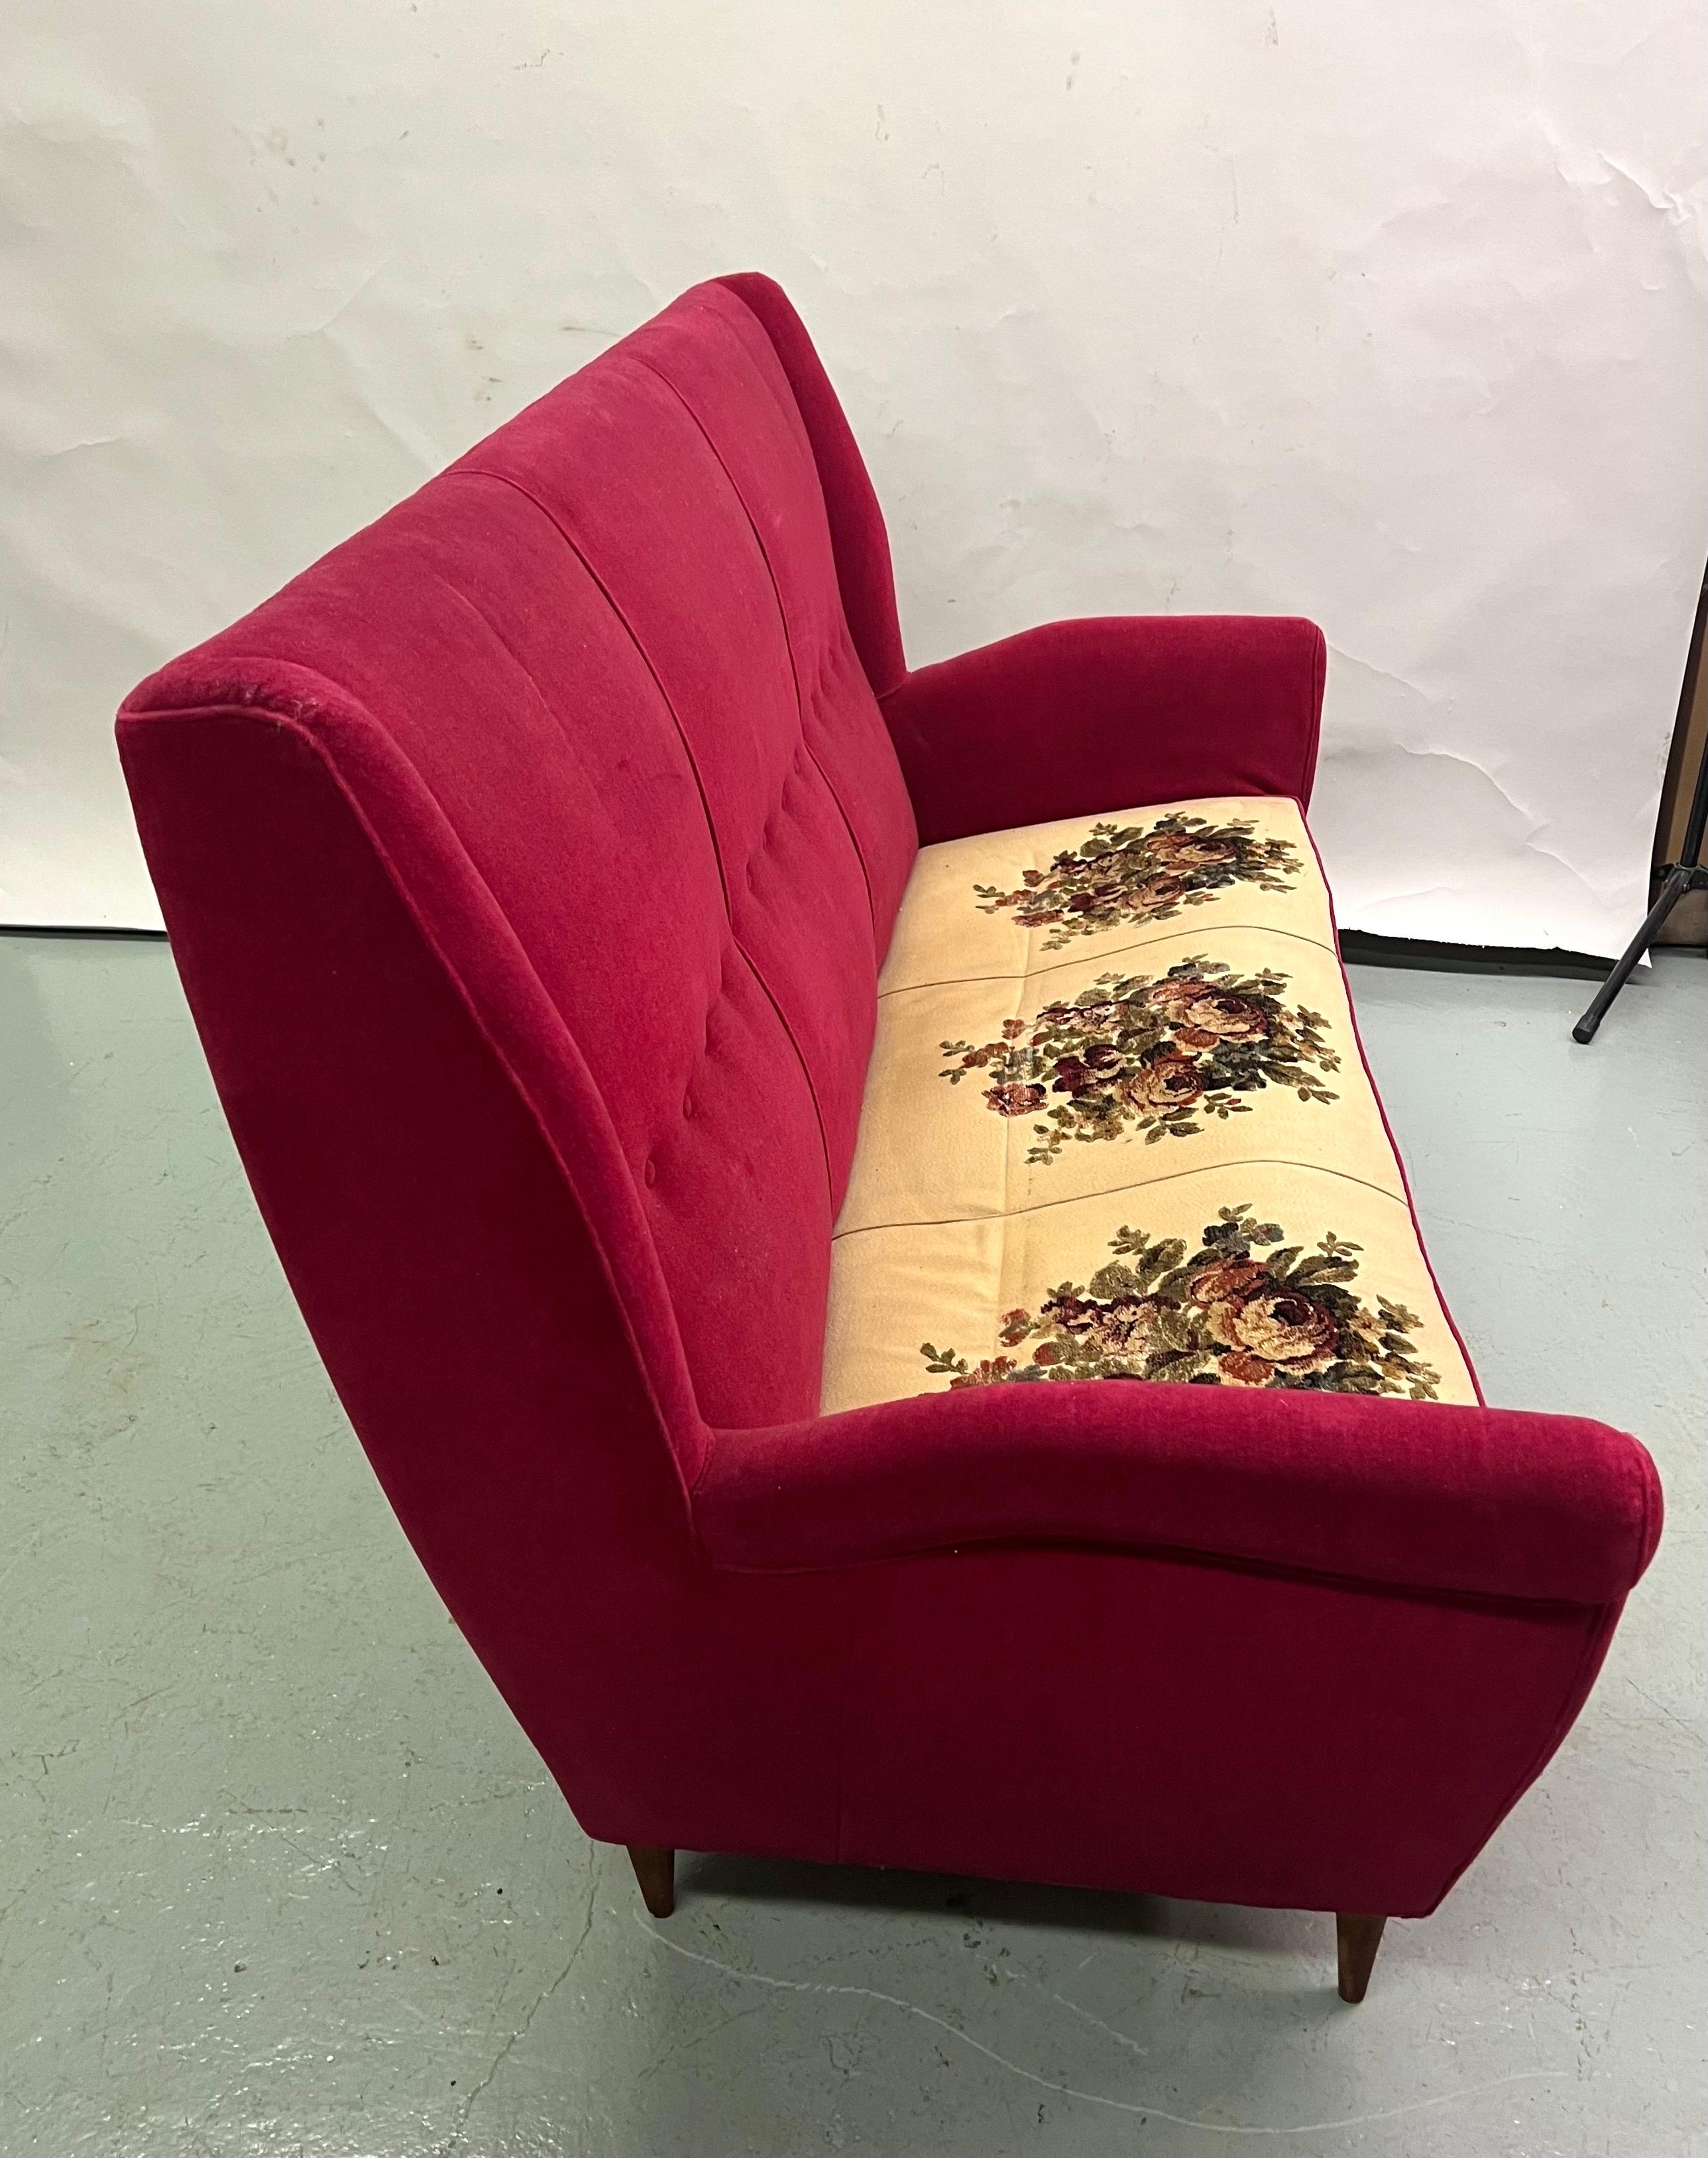 Italian Mid-Century Modern Neoclassical Sofa by Gio Ponti for ISA Bergamo In Good Condition For Sale In New York, NY